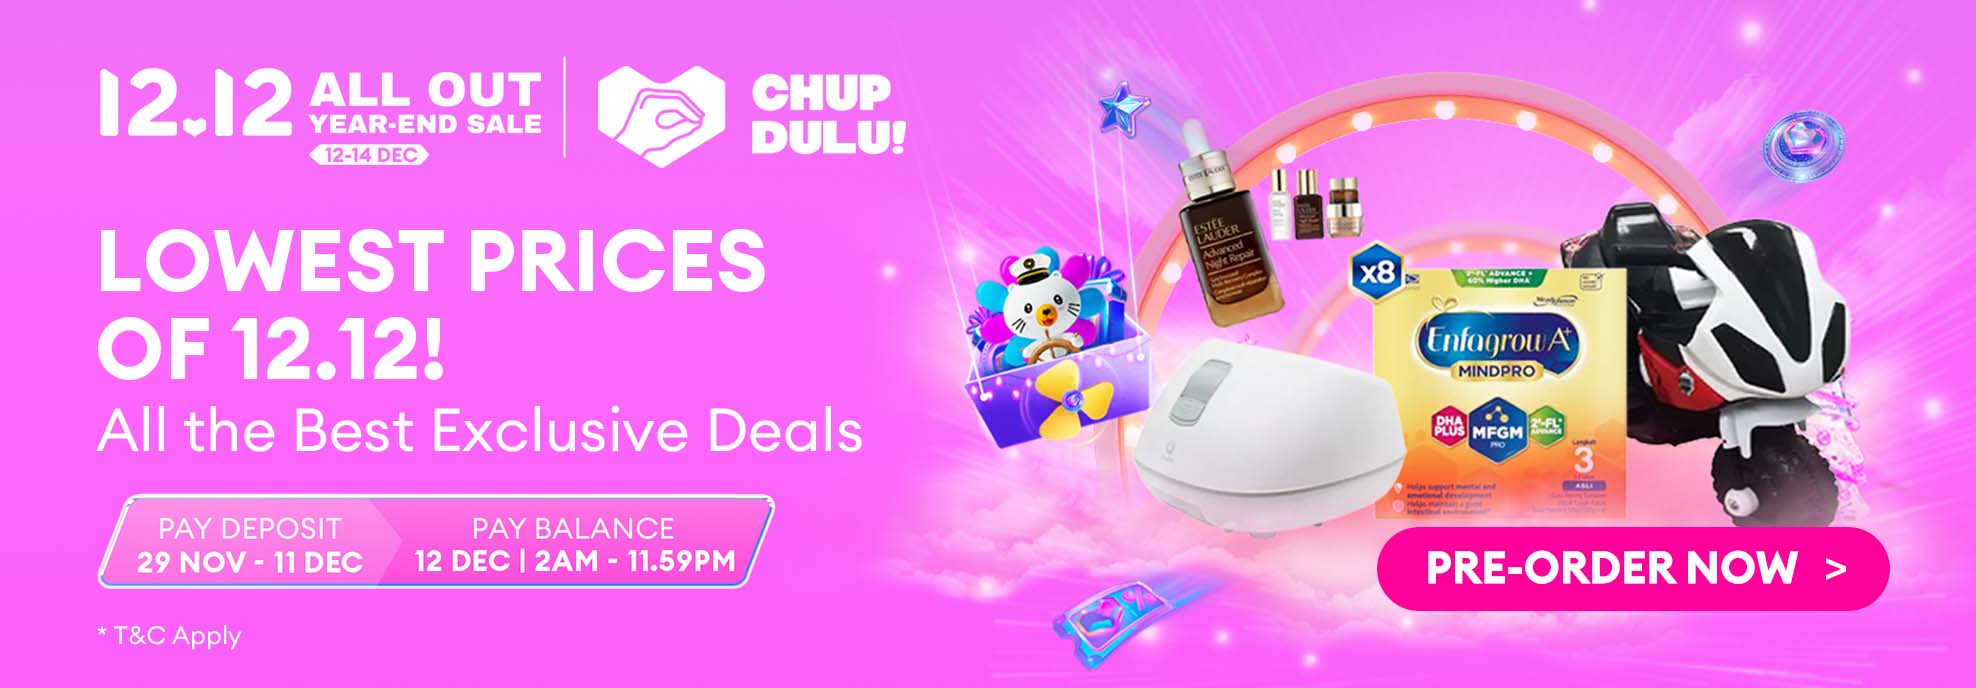 12.12 All Out Year-End Sale - Chup Dulu Pre Teasing Day 1